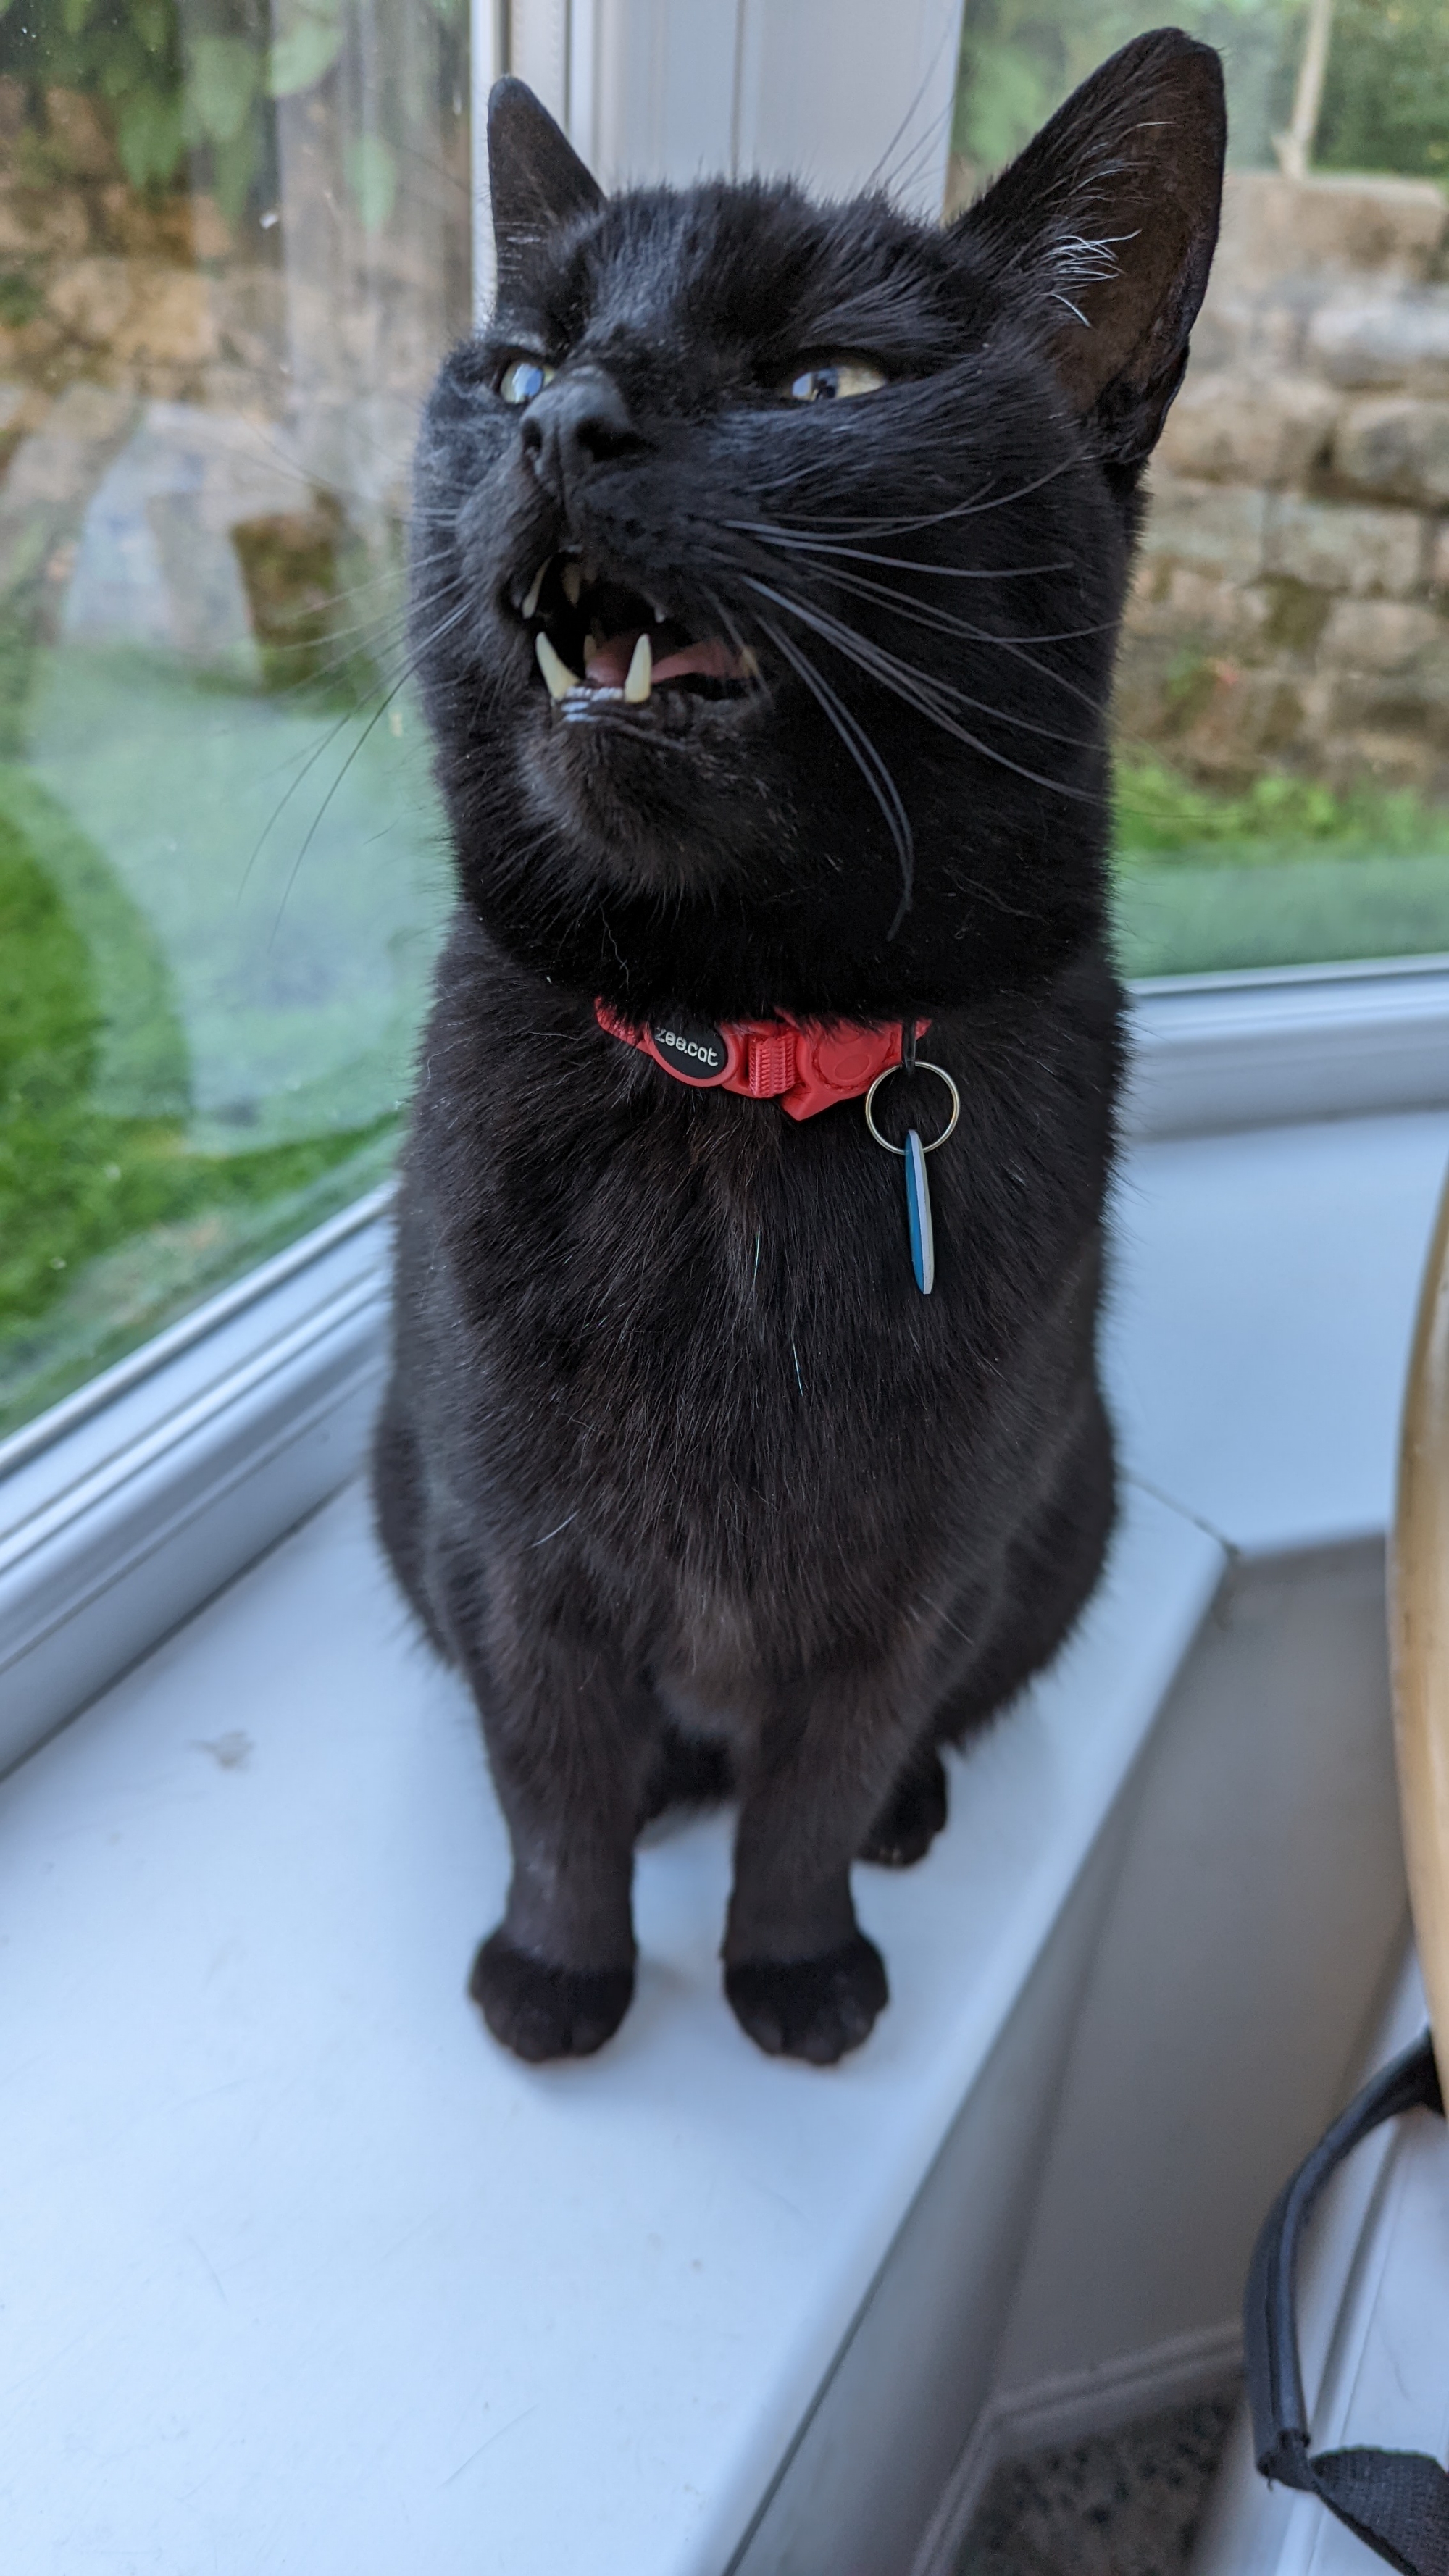 Morph, the black cat, looking slightly away from the camera, mid yawn with his toofies quite visible and a hot coral Zeedog collar (with Zeecat written on it) showing off